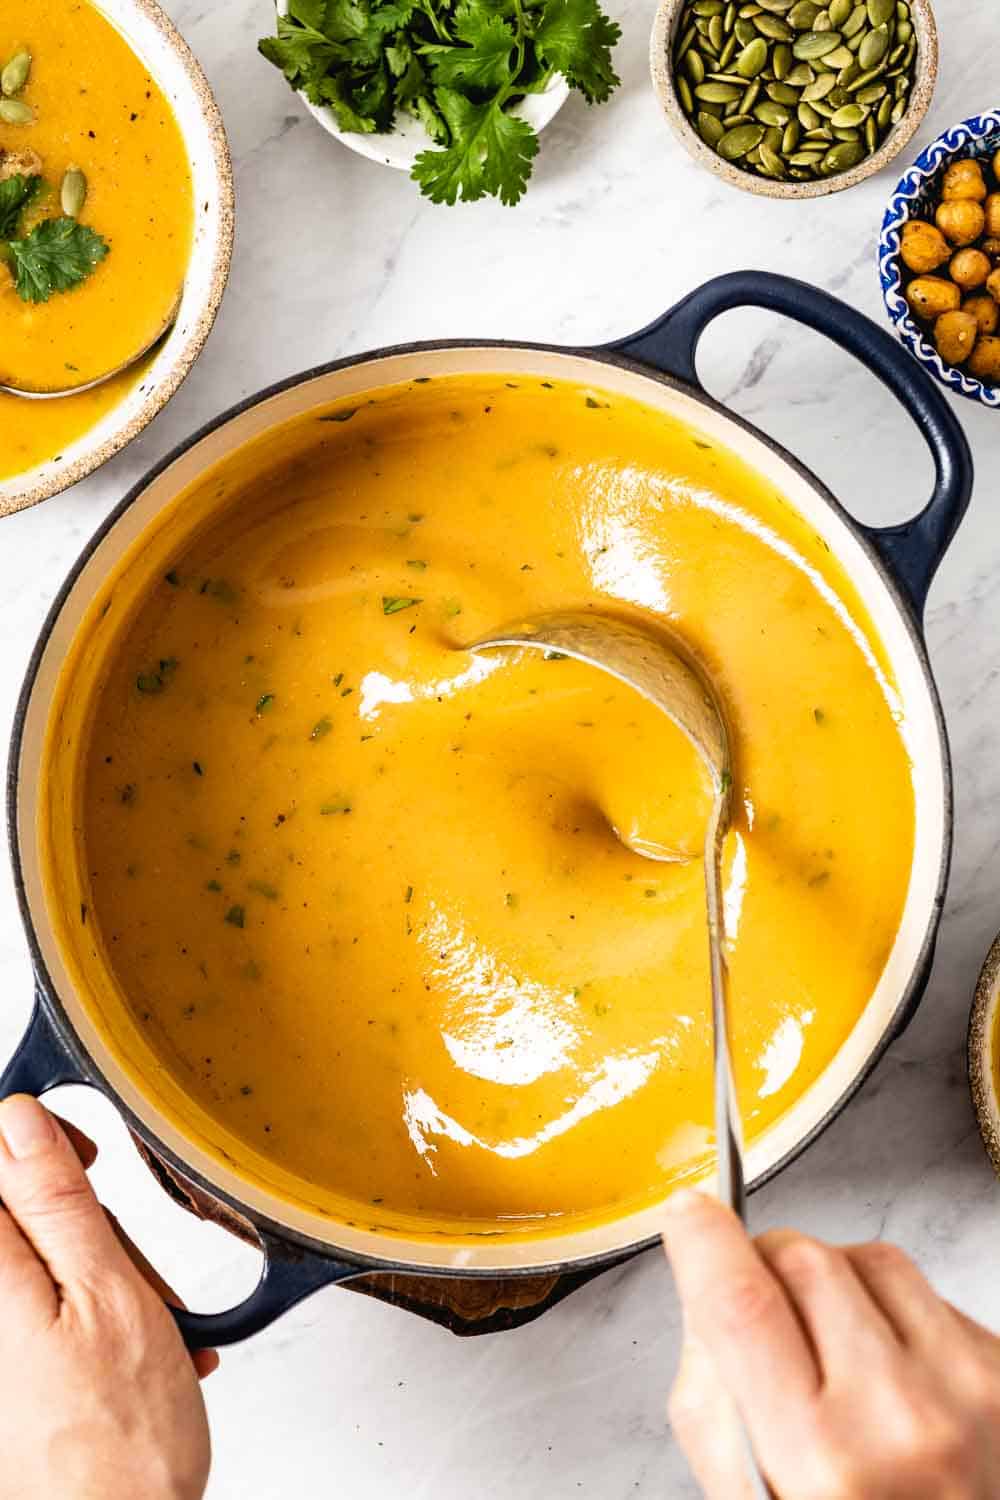 Creamy and Light Vegan Sweet Potato Carrot Ginger Soup is photographed from the top view in the pot as a woman is stirring it.